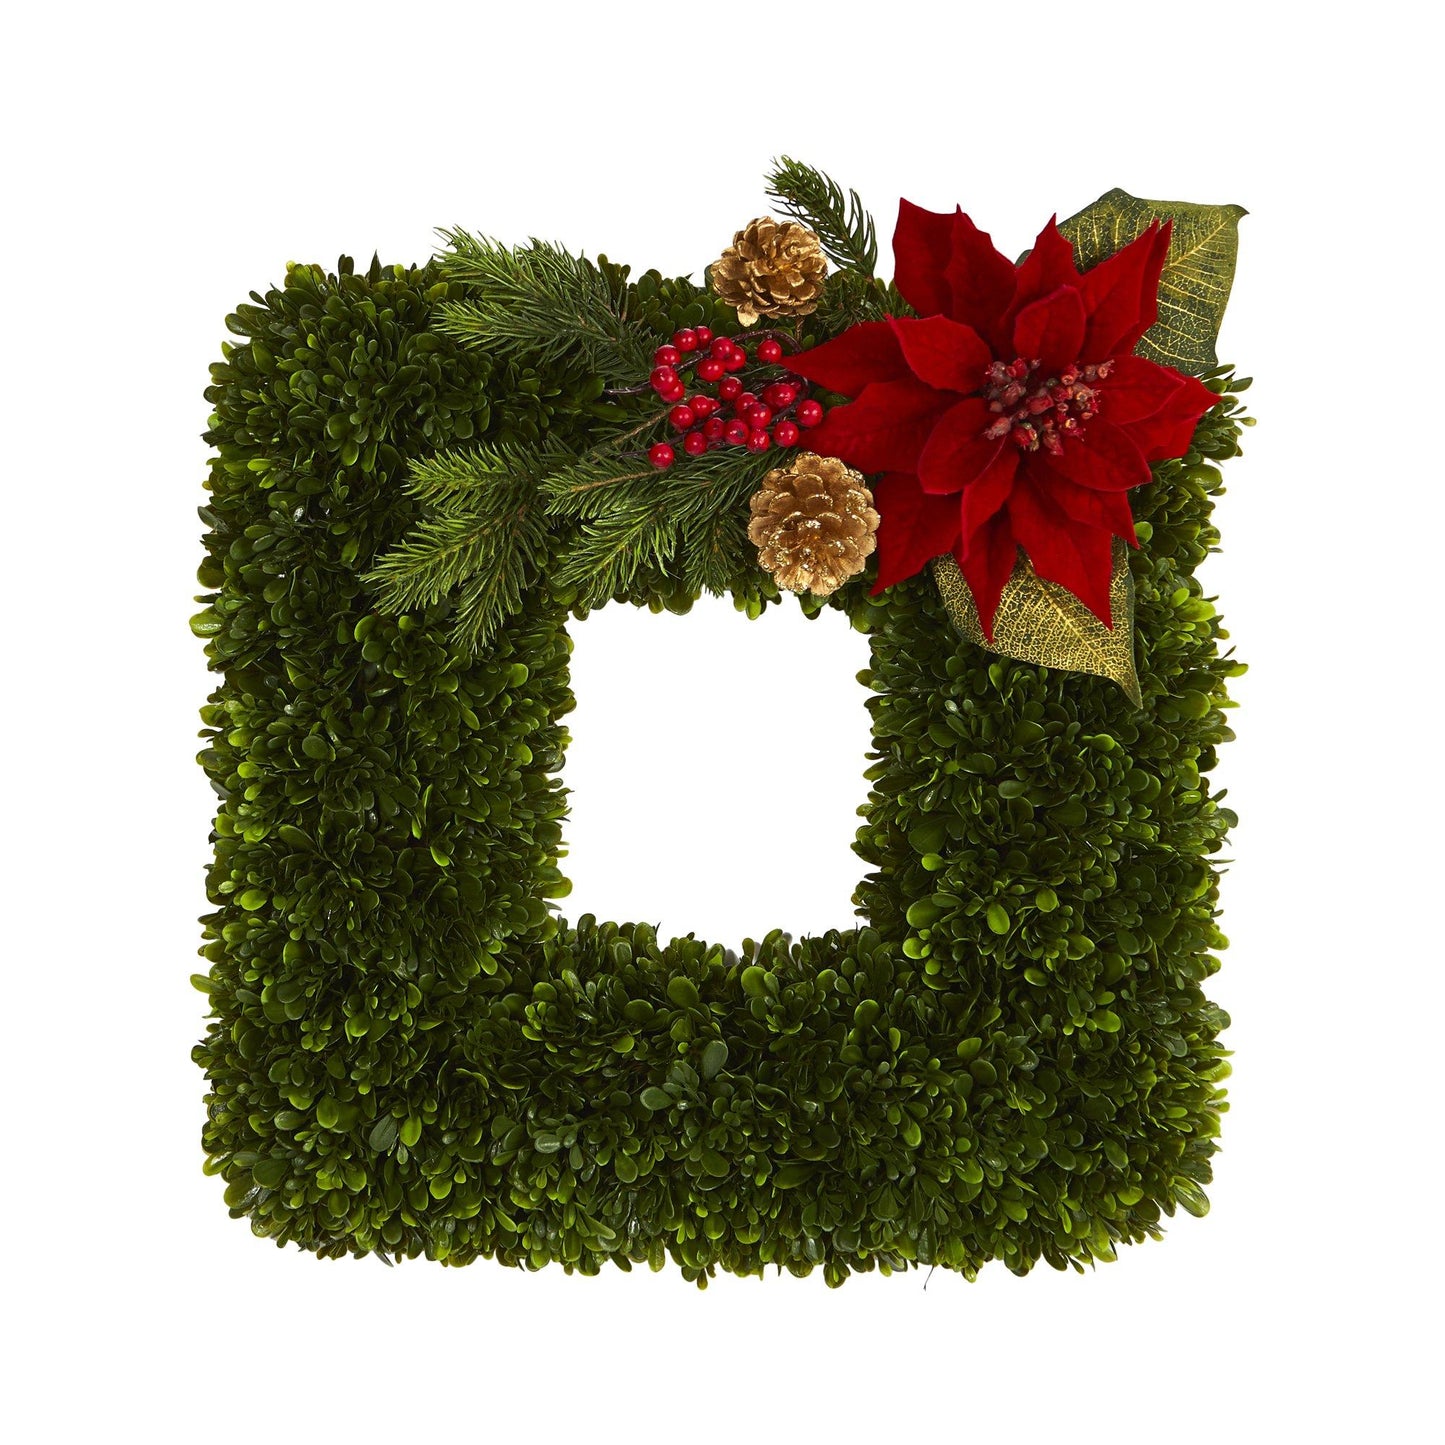 16” Tea Leaf and Poinsettia Artificial Square Wreath by Nearly Natural